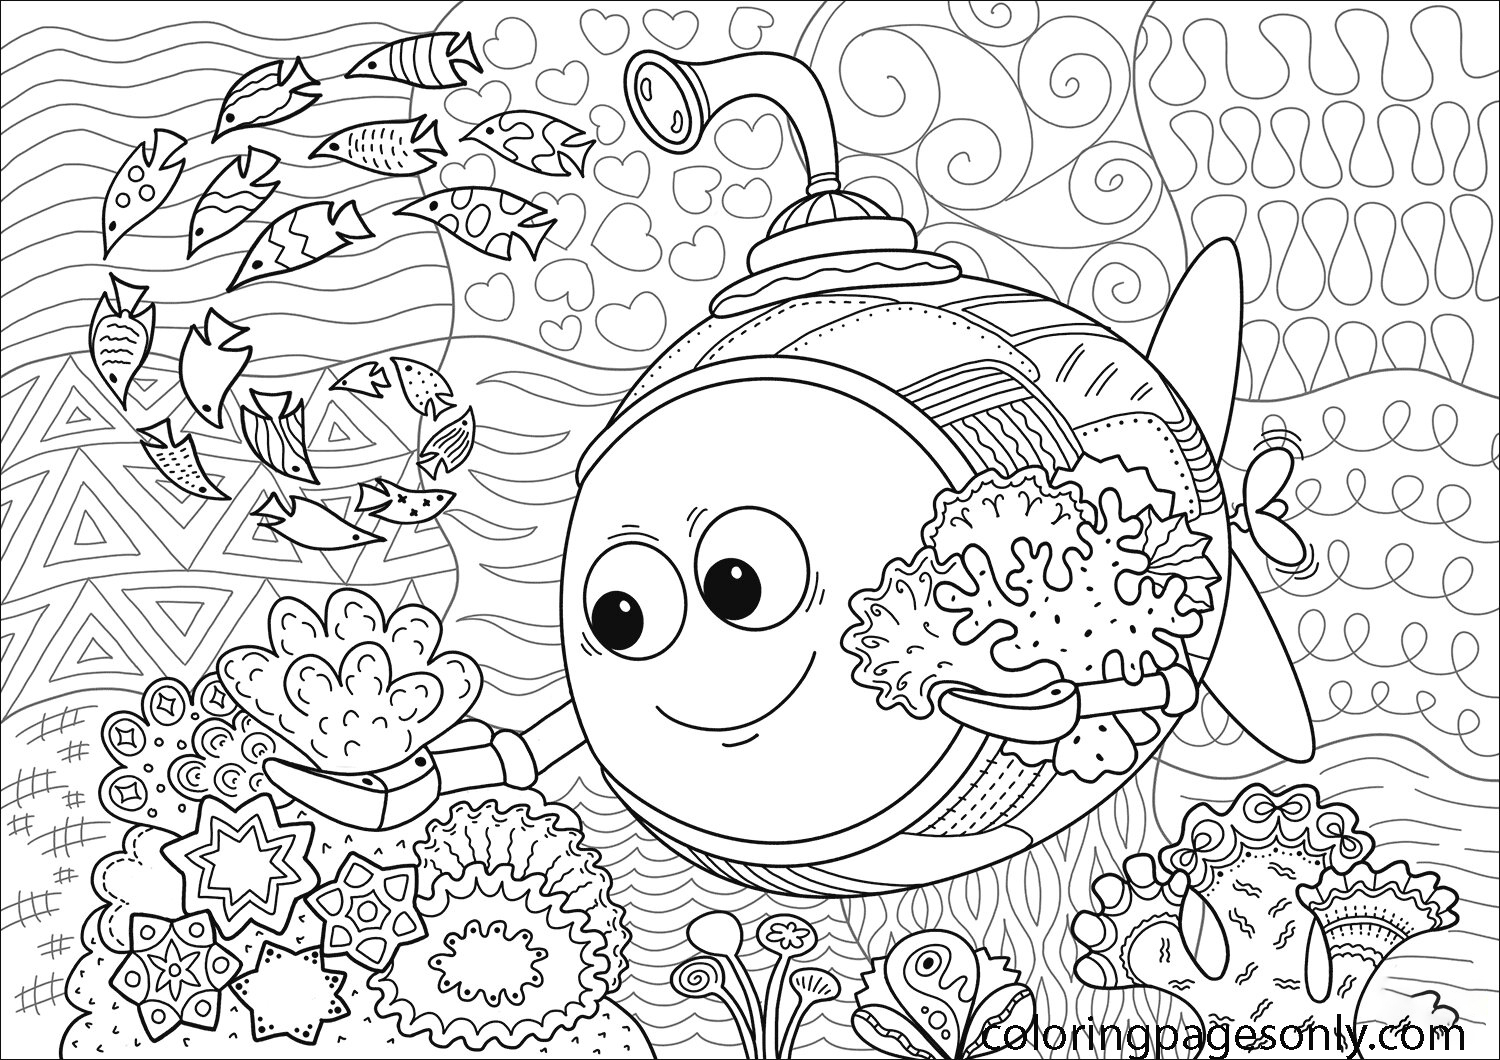 Scientific bathyscaphe doing research of Coral Reef Ecosystem Coloring Pages  - Nature & Seasons Coloring Pages - Coloring Pages For Kids And Adults